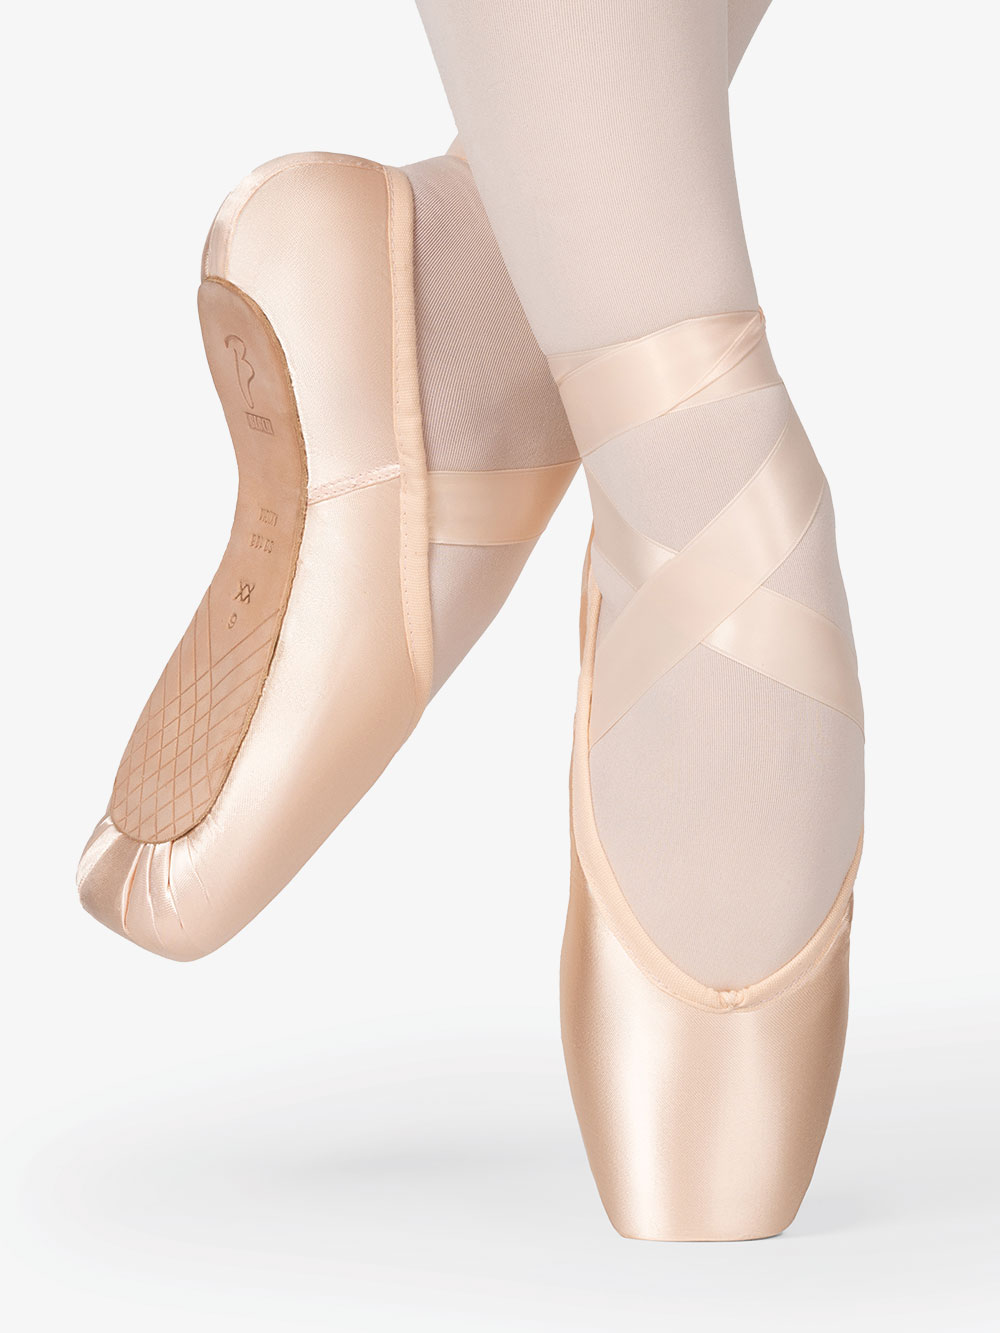 bloch pointe shoes price